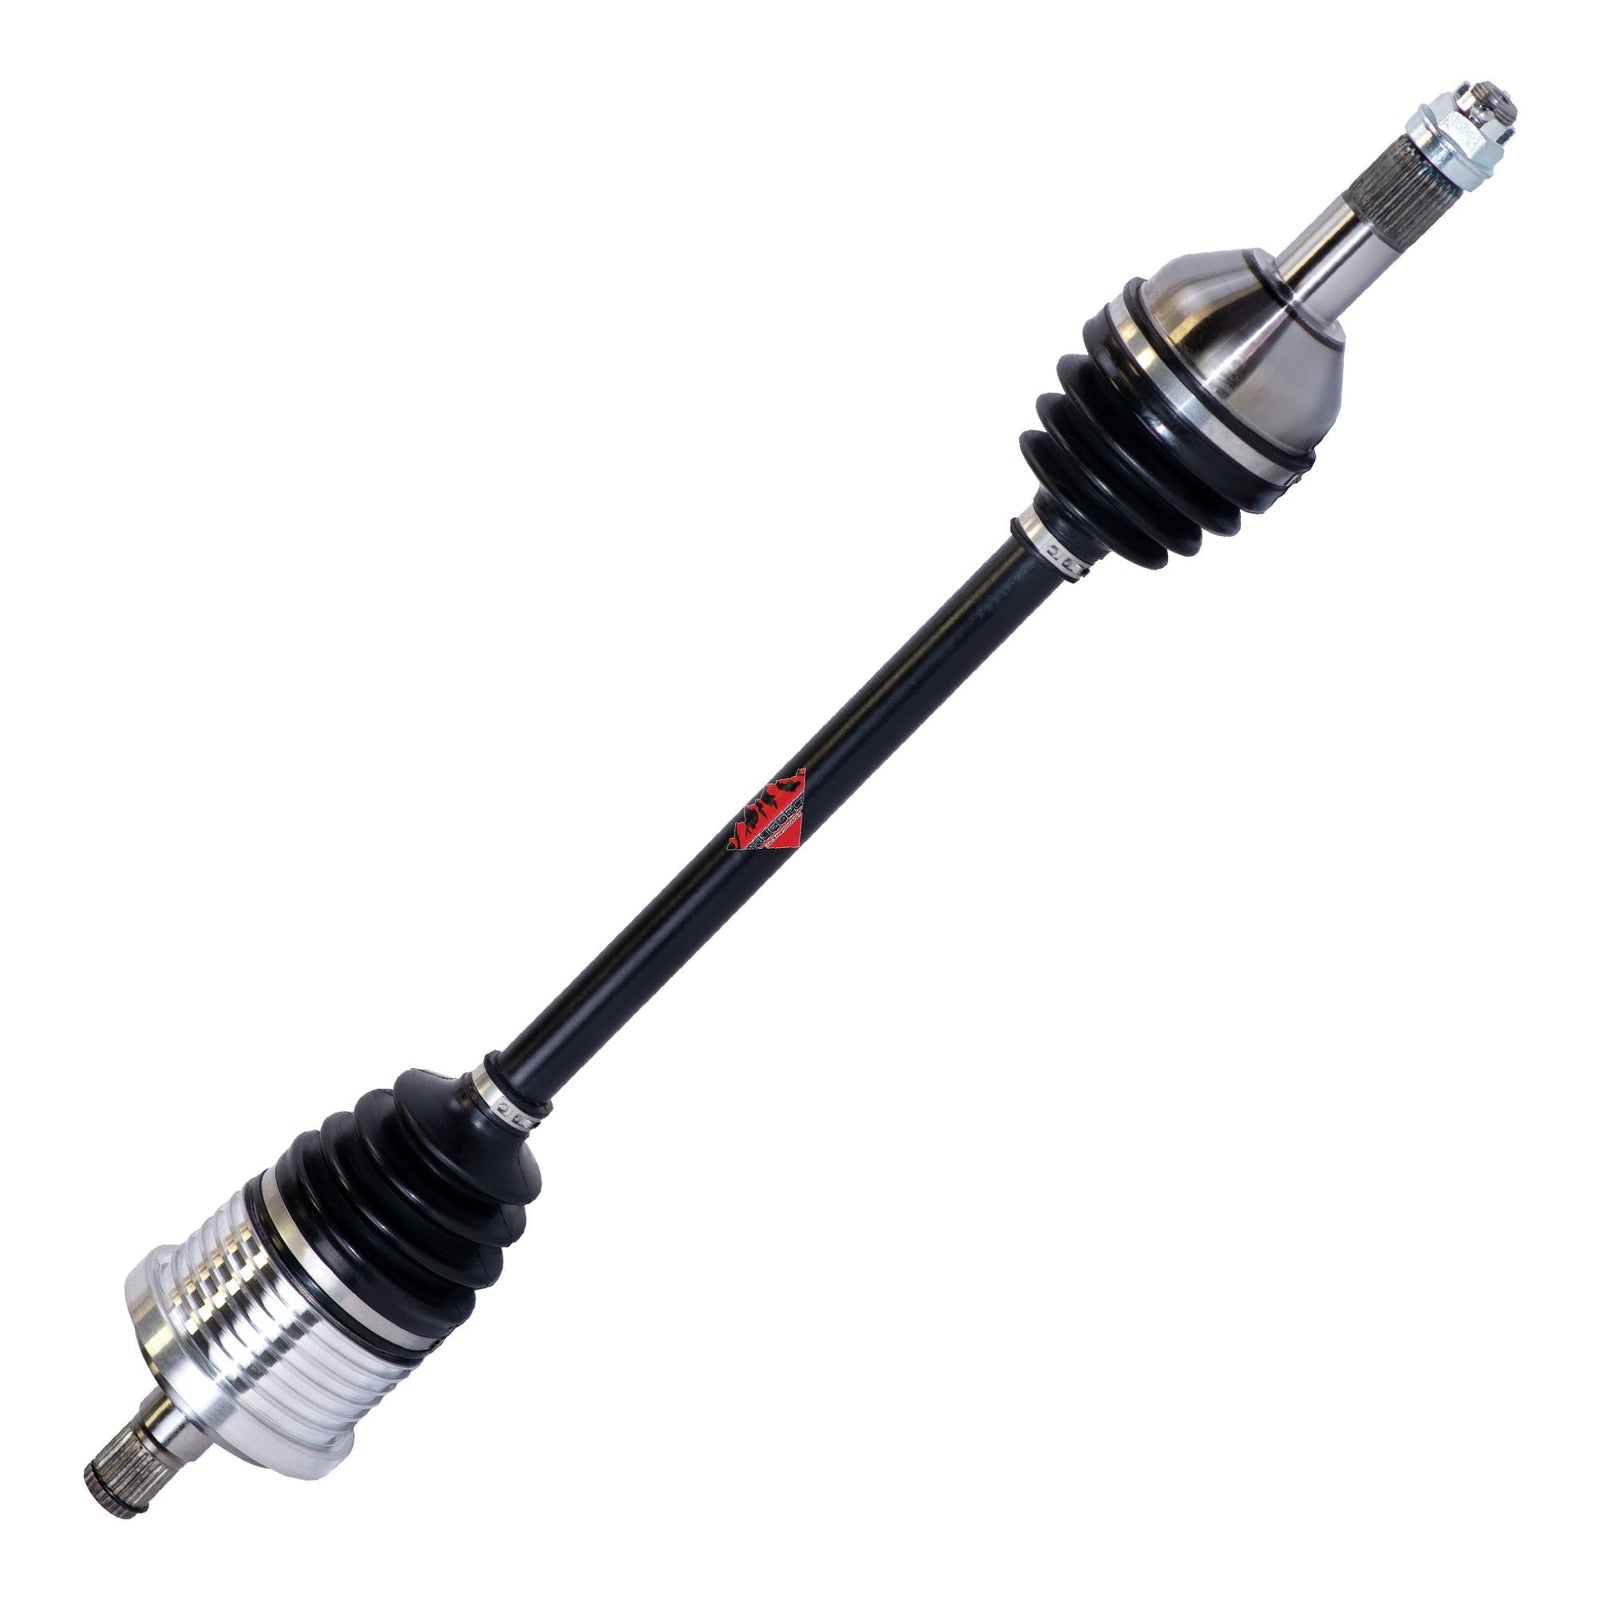 Arctic Cat XR 500 Rugged Performance Axle